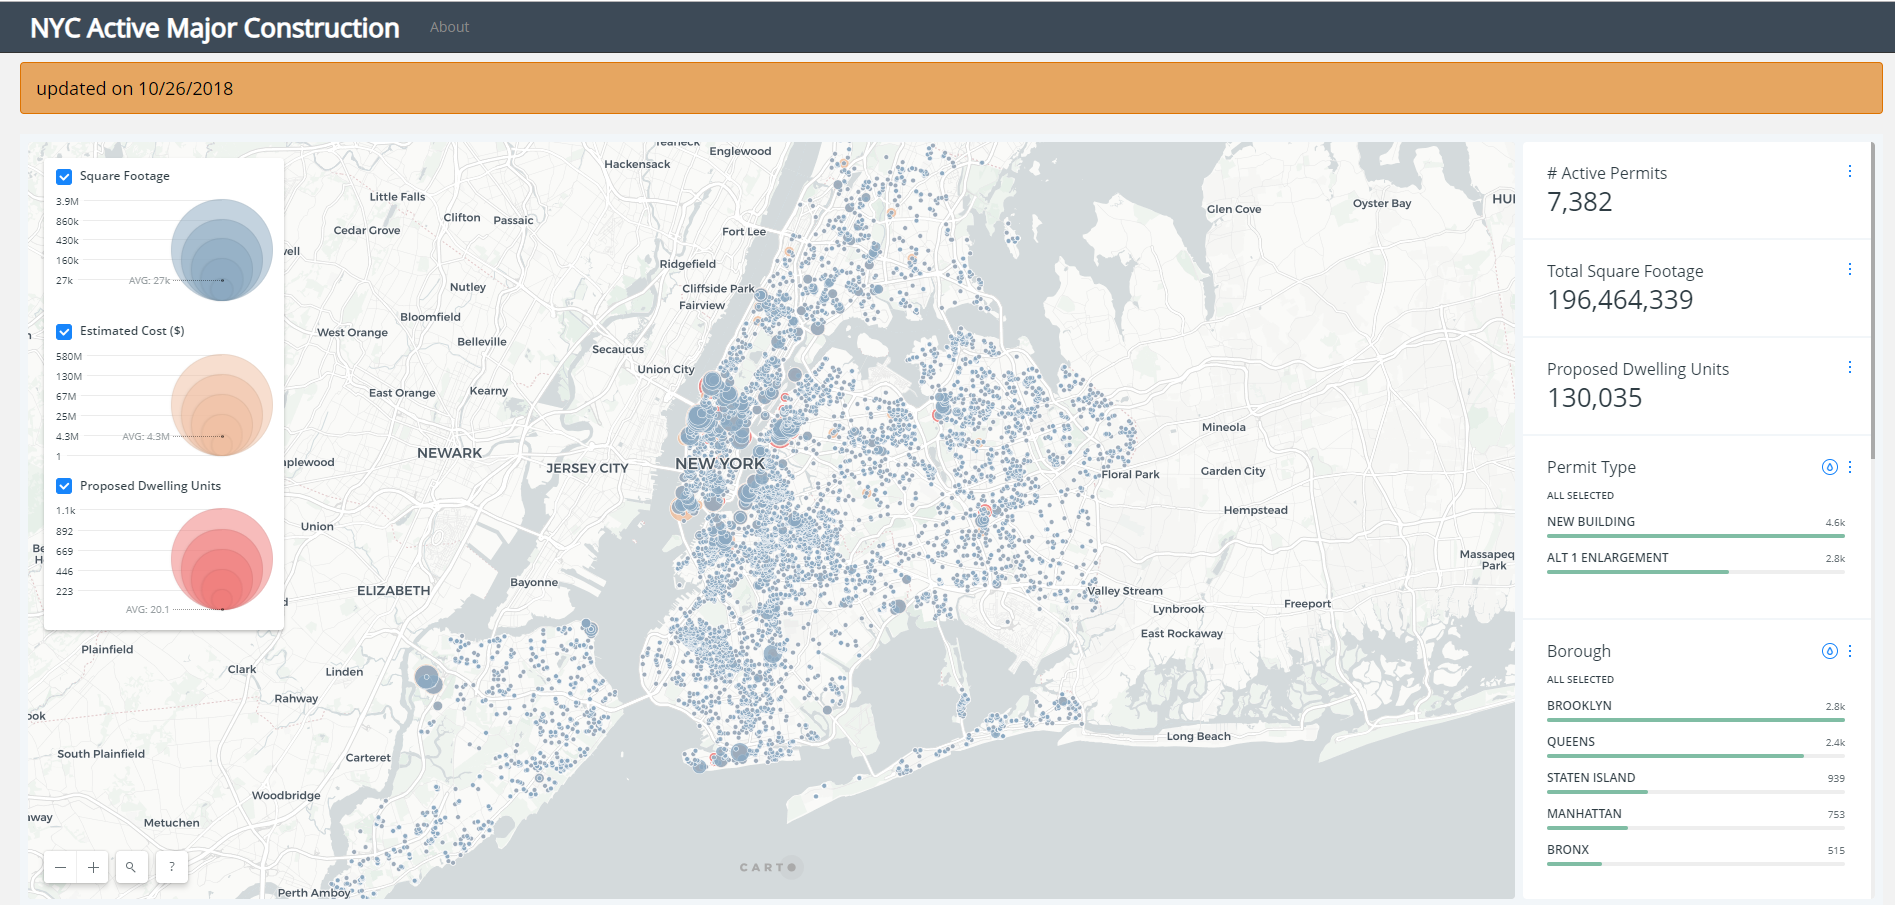 NYC DOB Releases New Interactive Construction Map